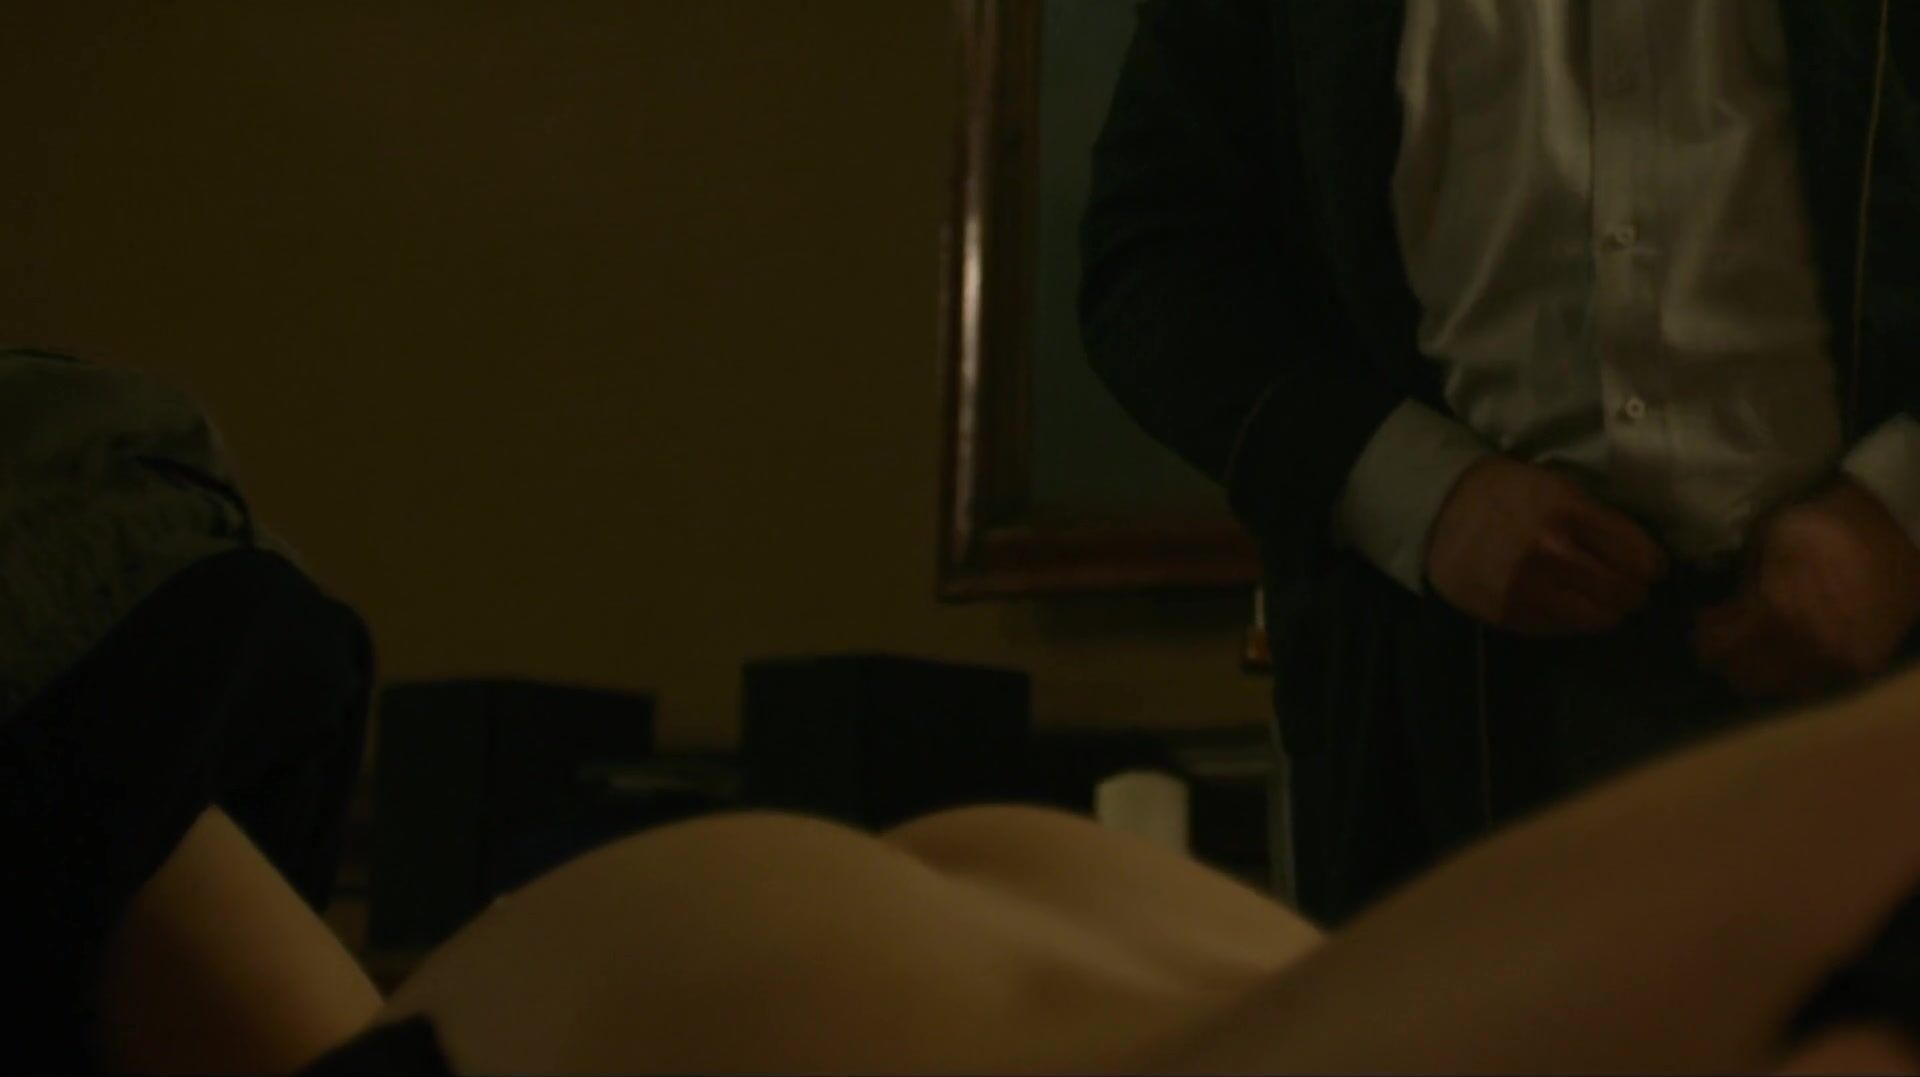 Cartoon Men hump Rooney Mara with her consent or without it in Girl With The Dragon Tattoo Desi - 1